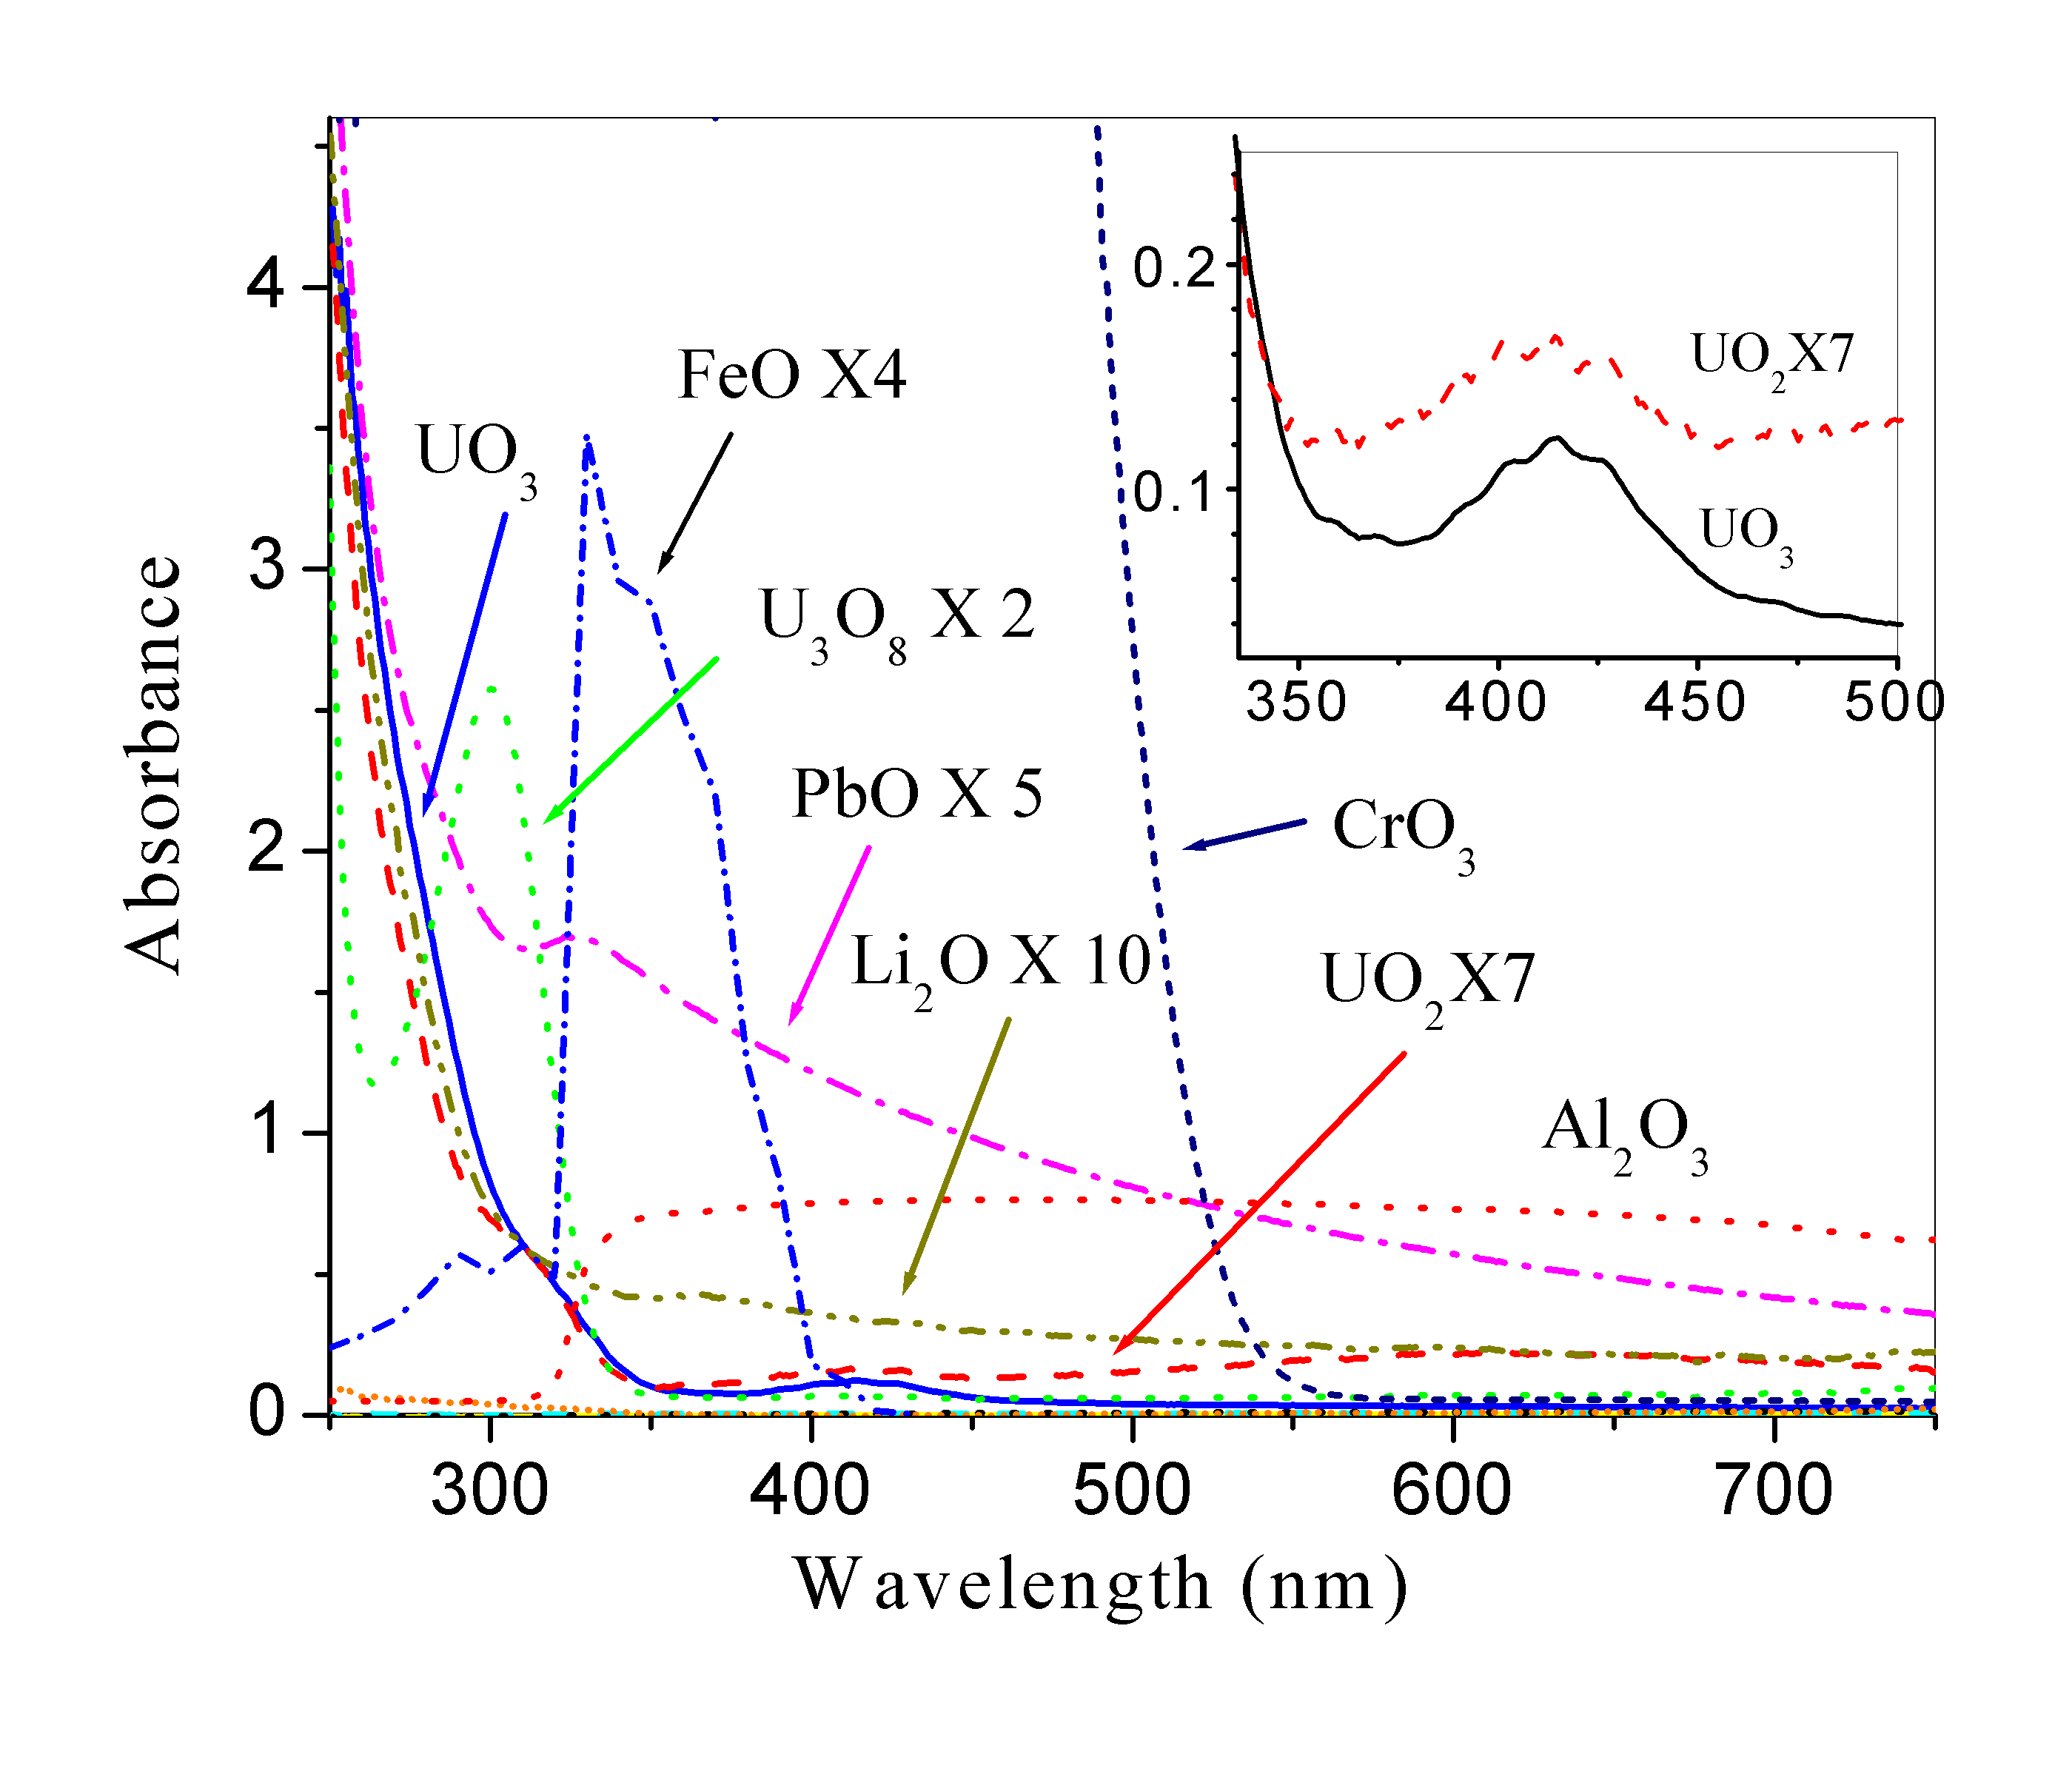 Figure 2. Absorption spectra of 0.1% UO2, UO3, U3O8, Al2O3, CrO3, FeO, Li2O and PbO in HNO3 solution. All the spectra have subtracted absorption of the corresponding solvent (HNO3.